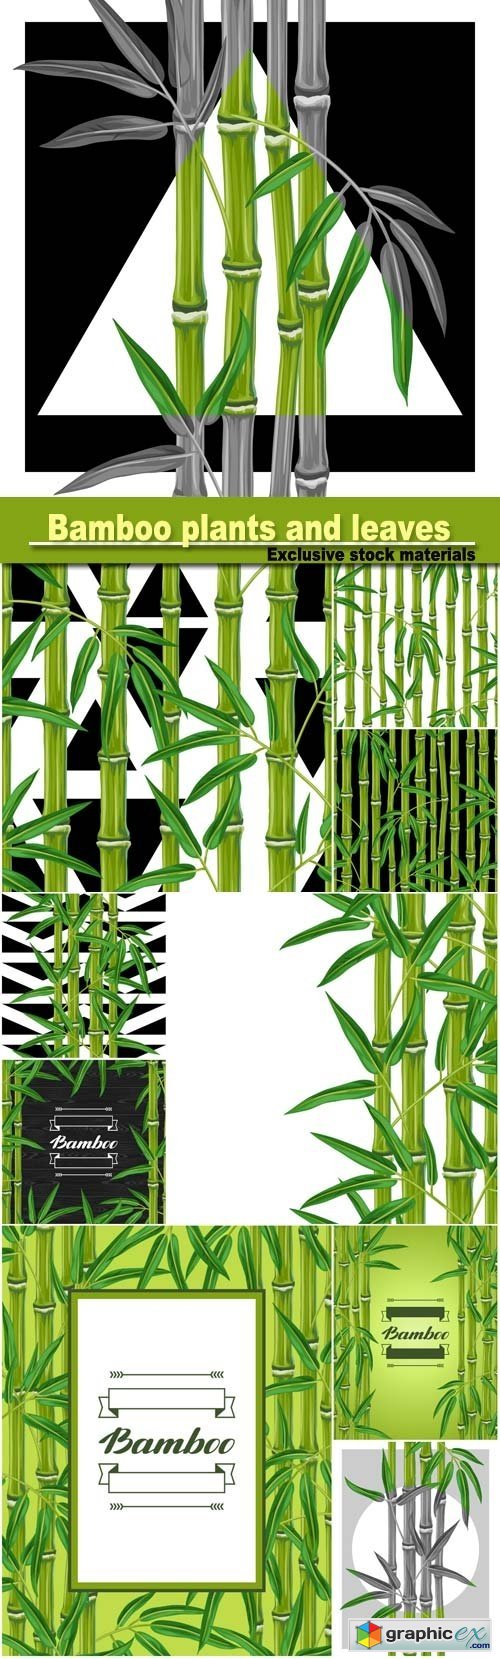 Background with bamboo plants and leaves